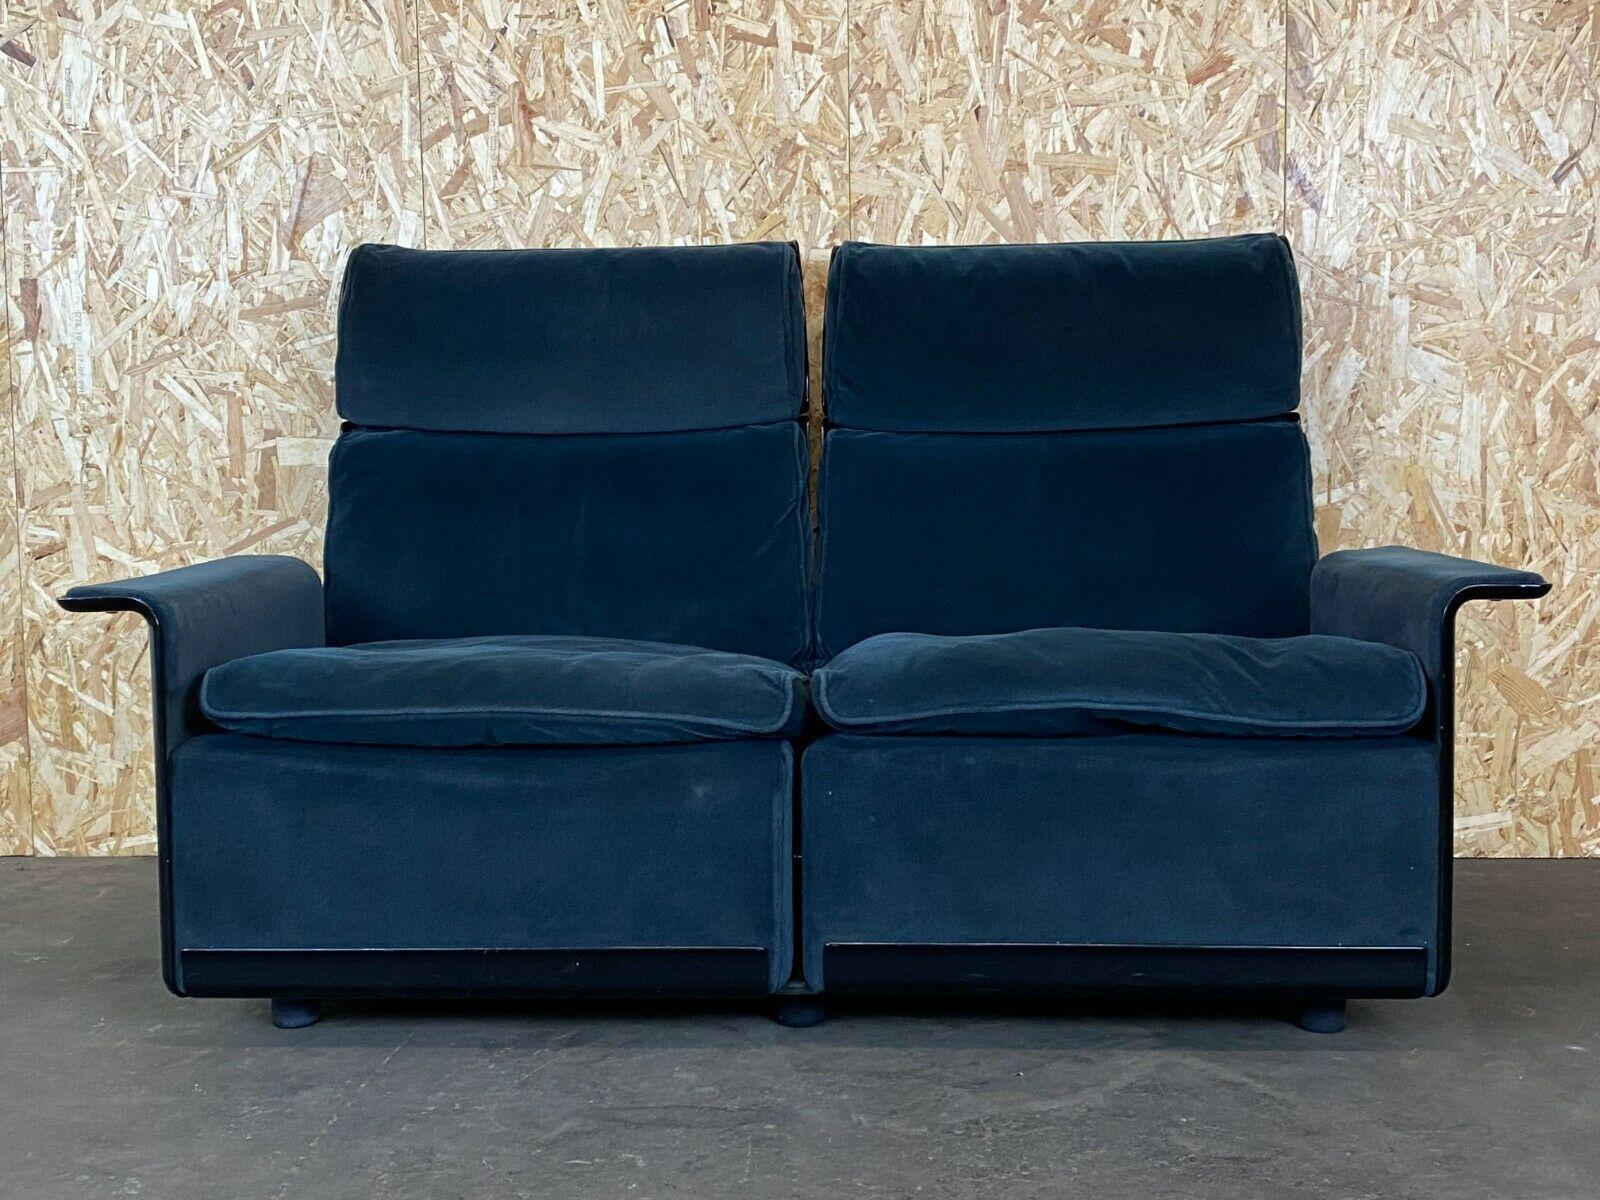 60s 70s Dieter Rams for Vitsoe armchair program 620 design couch fabric

Object: 2-seater sofa

Manufacturer: Vitsoe

Condition: good - vintage

Age: around 1960-1970

Dimensions:

153.5cm x 81cm x 91cm
Seat height = 40cm

Other